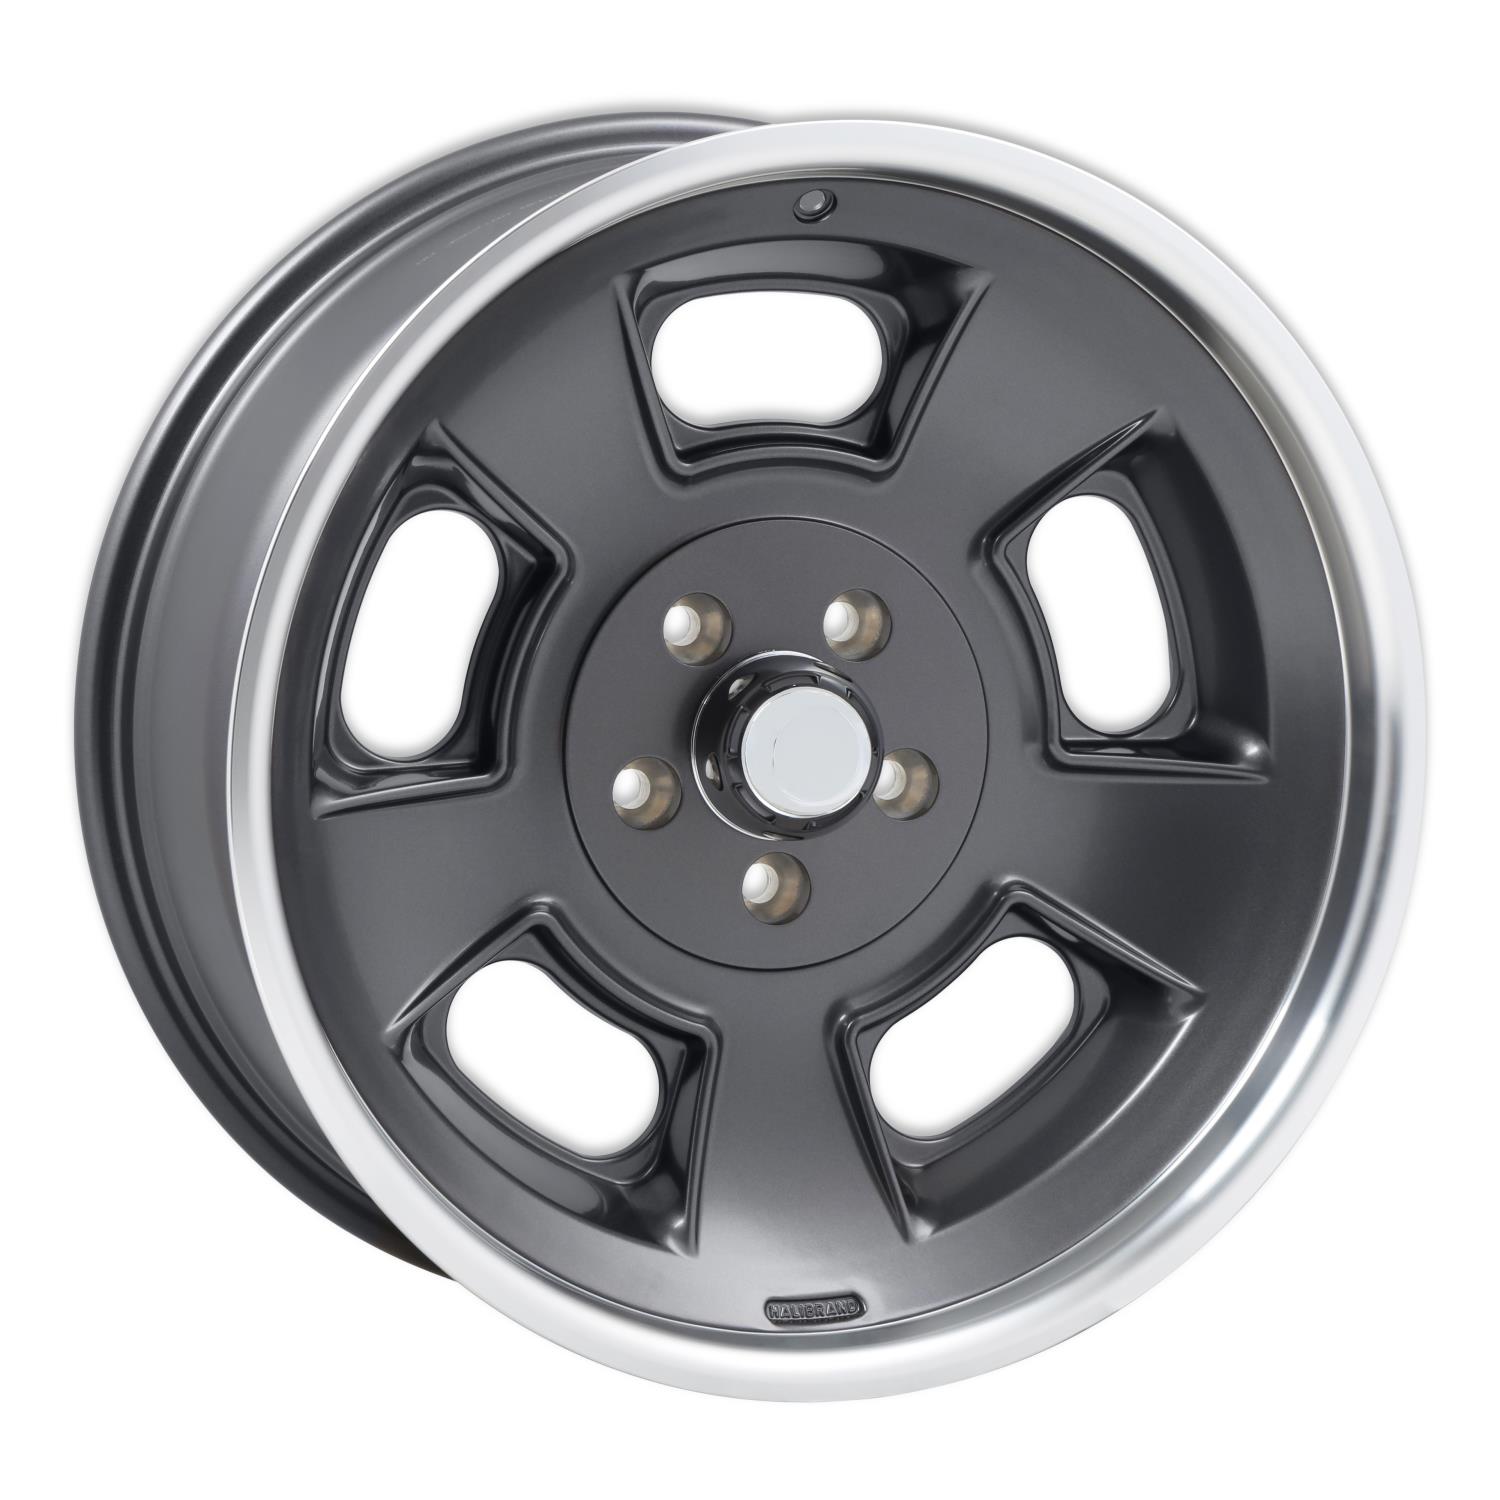 Sprint Front Wheel, Size: 20x8.5", Bolt Pattern: 5x5", Backspace: 4.75" [Anthracite with Machined Lip - Semi Gloss Clearcoat]